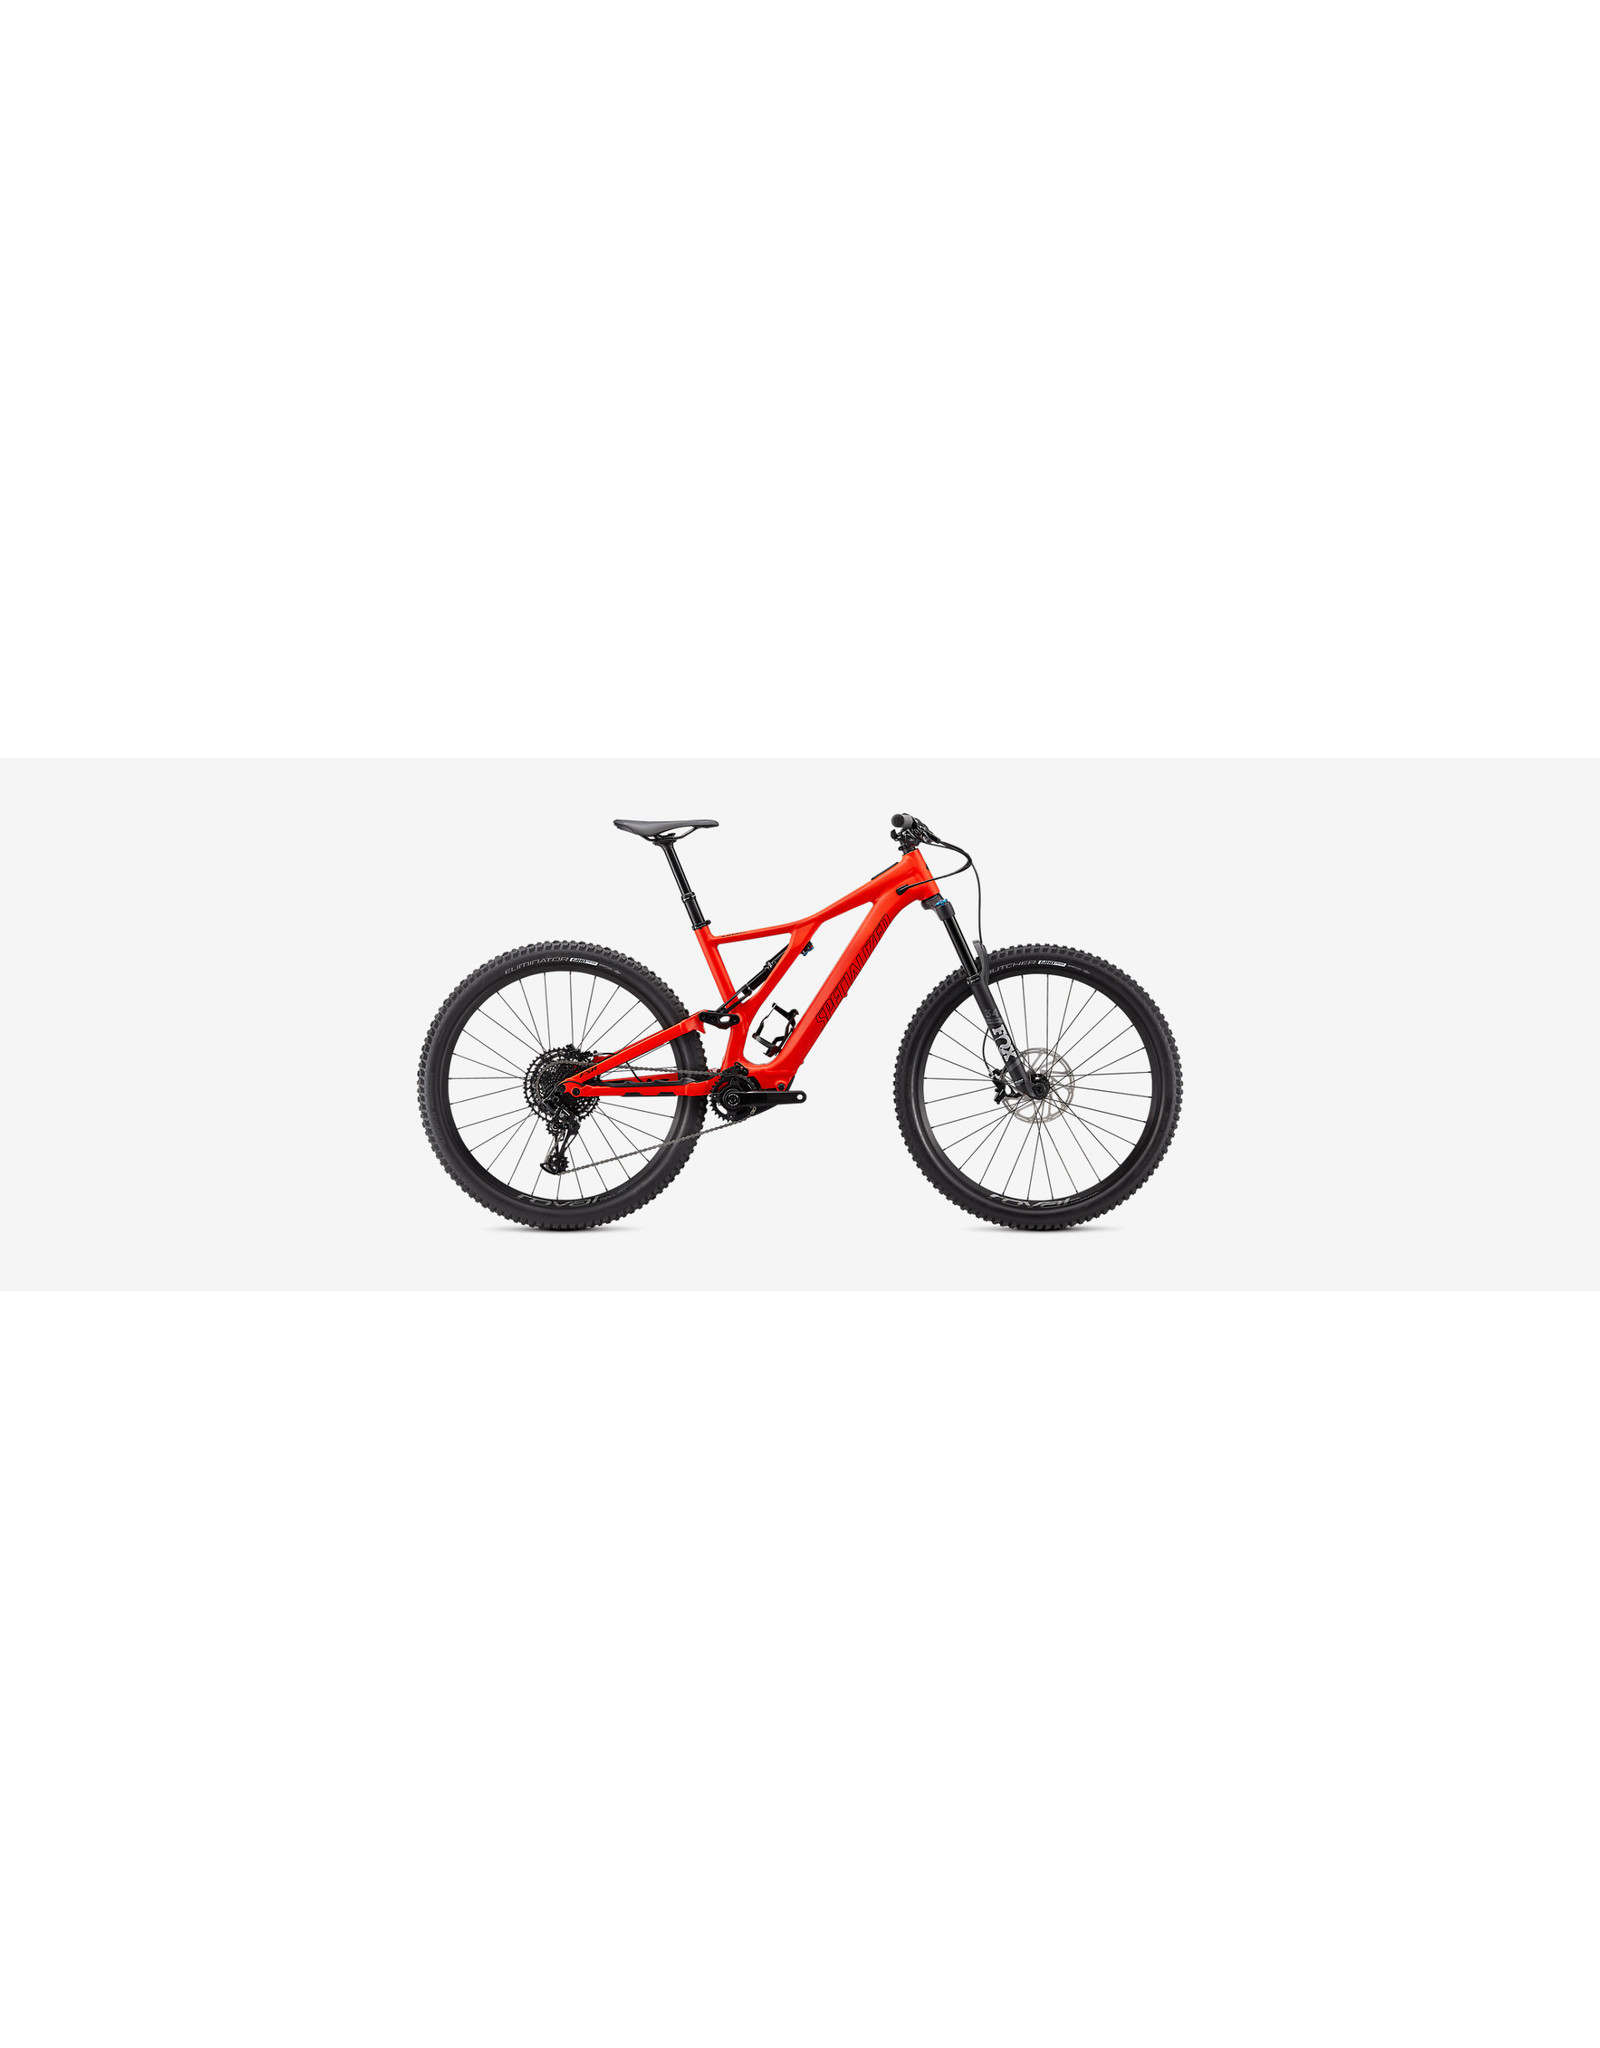 Specialized 21 Spec Levo SL Comp RktRed/Blk Large